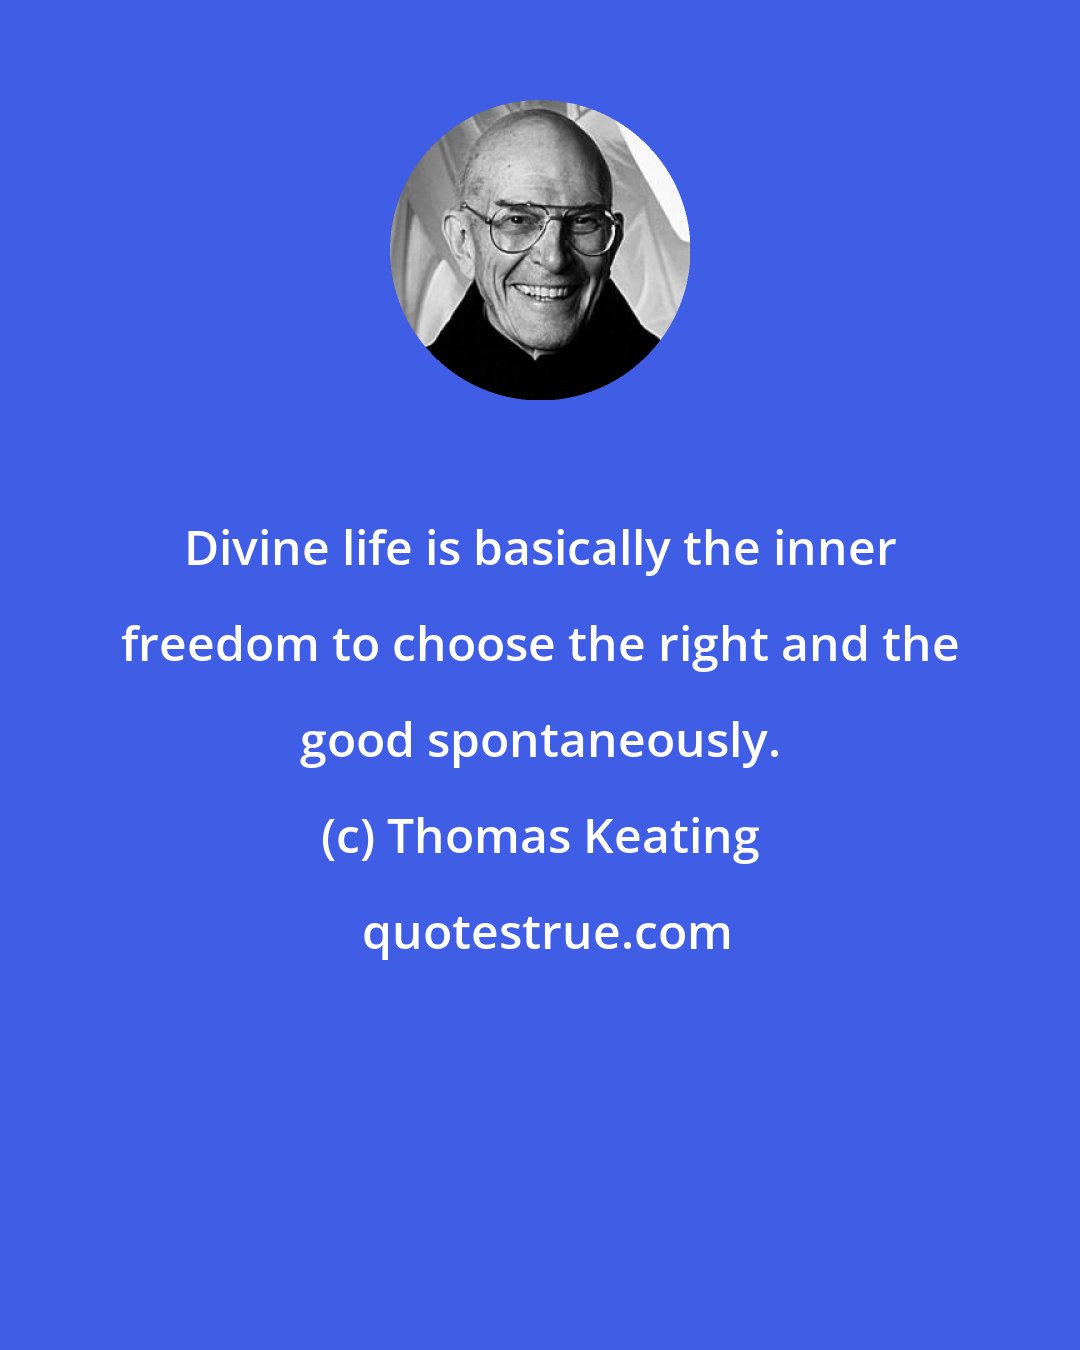 Thomas Keating: Divine life is basically the inner freedom to choose the right and the good spontaneously.